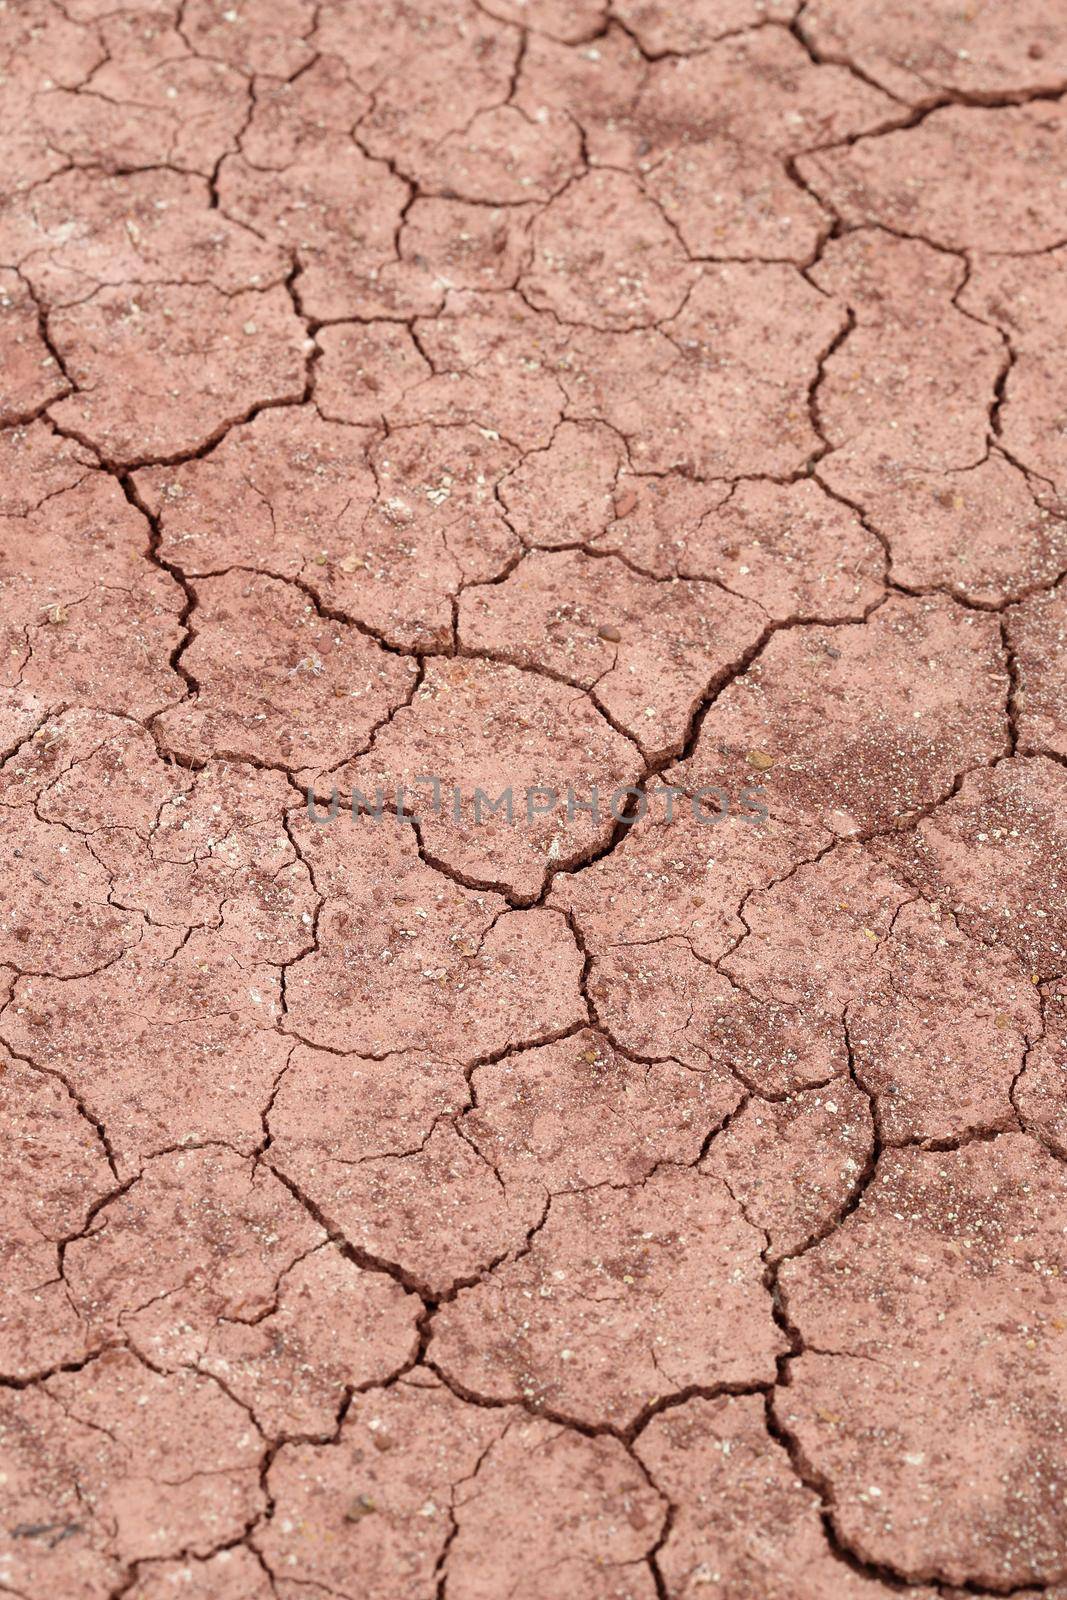 close-up of dry dracked soil ground texture